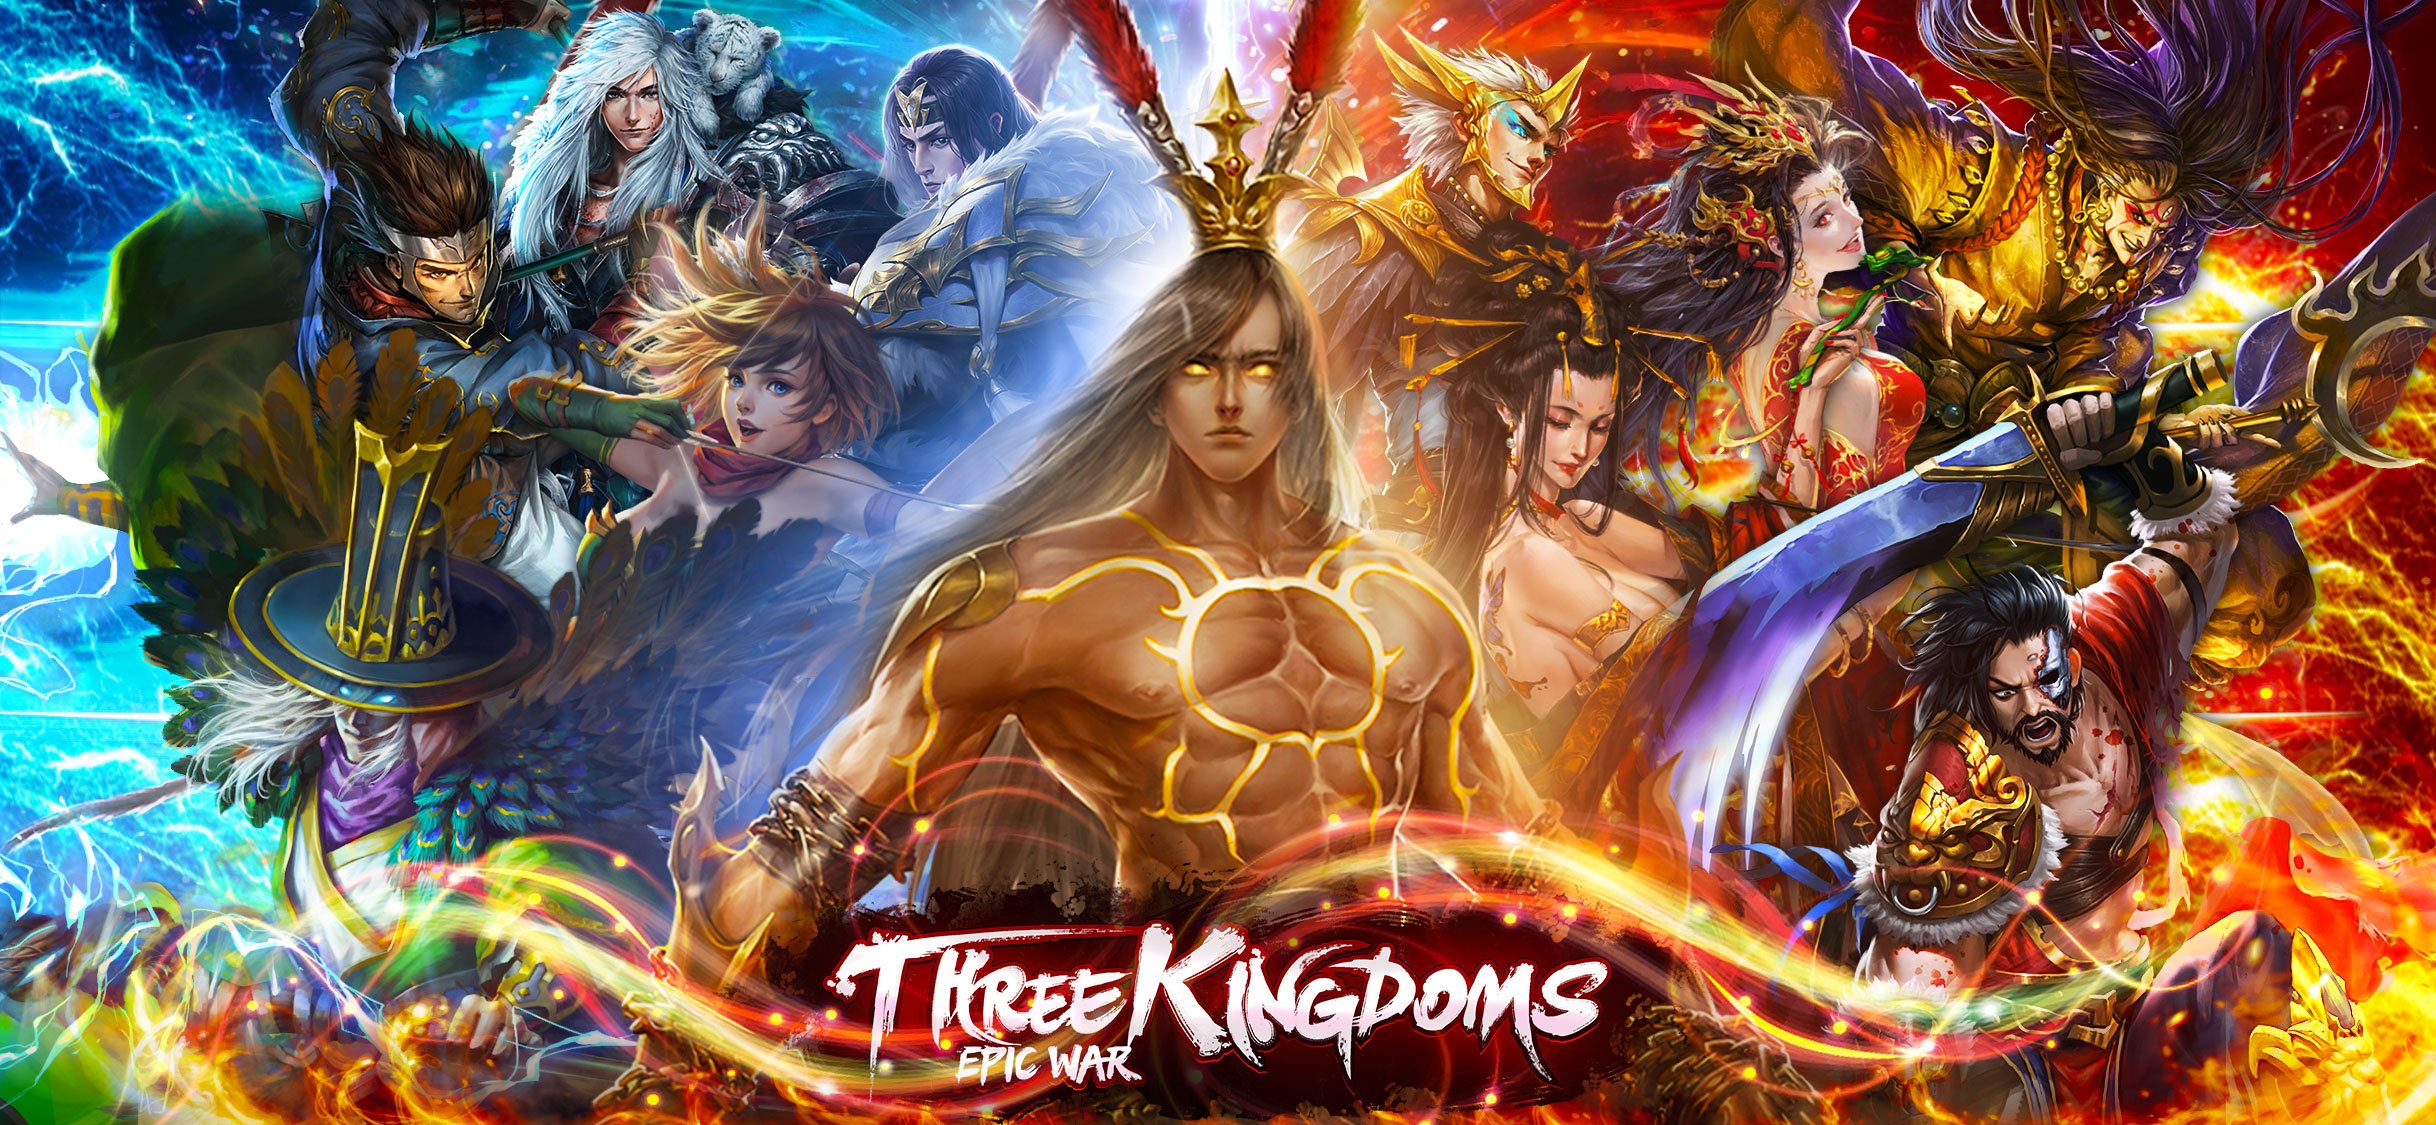 Three Kingdoms Epic War Battle System Guide: Become A Ruthless Commander |  Bluestacks 4